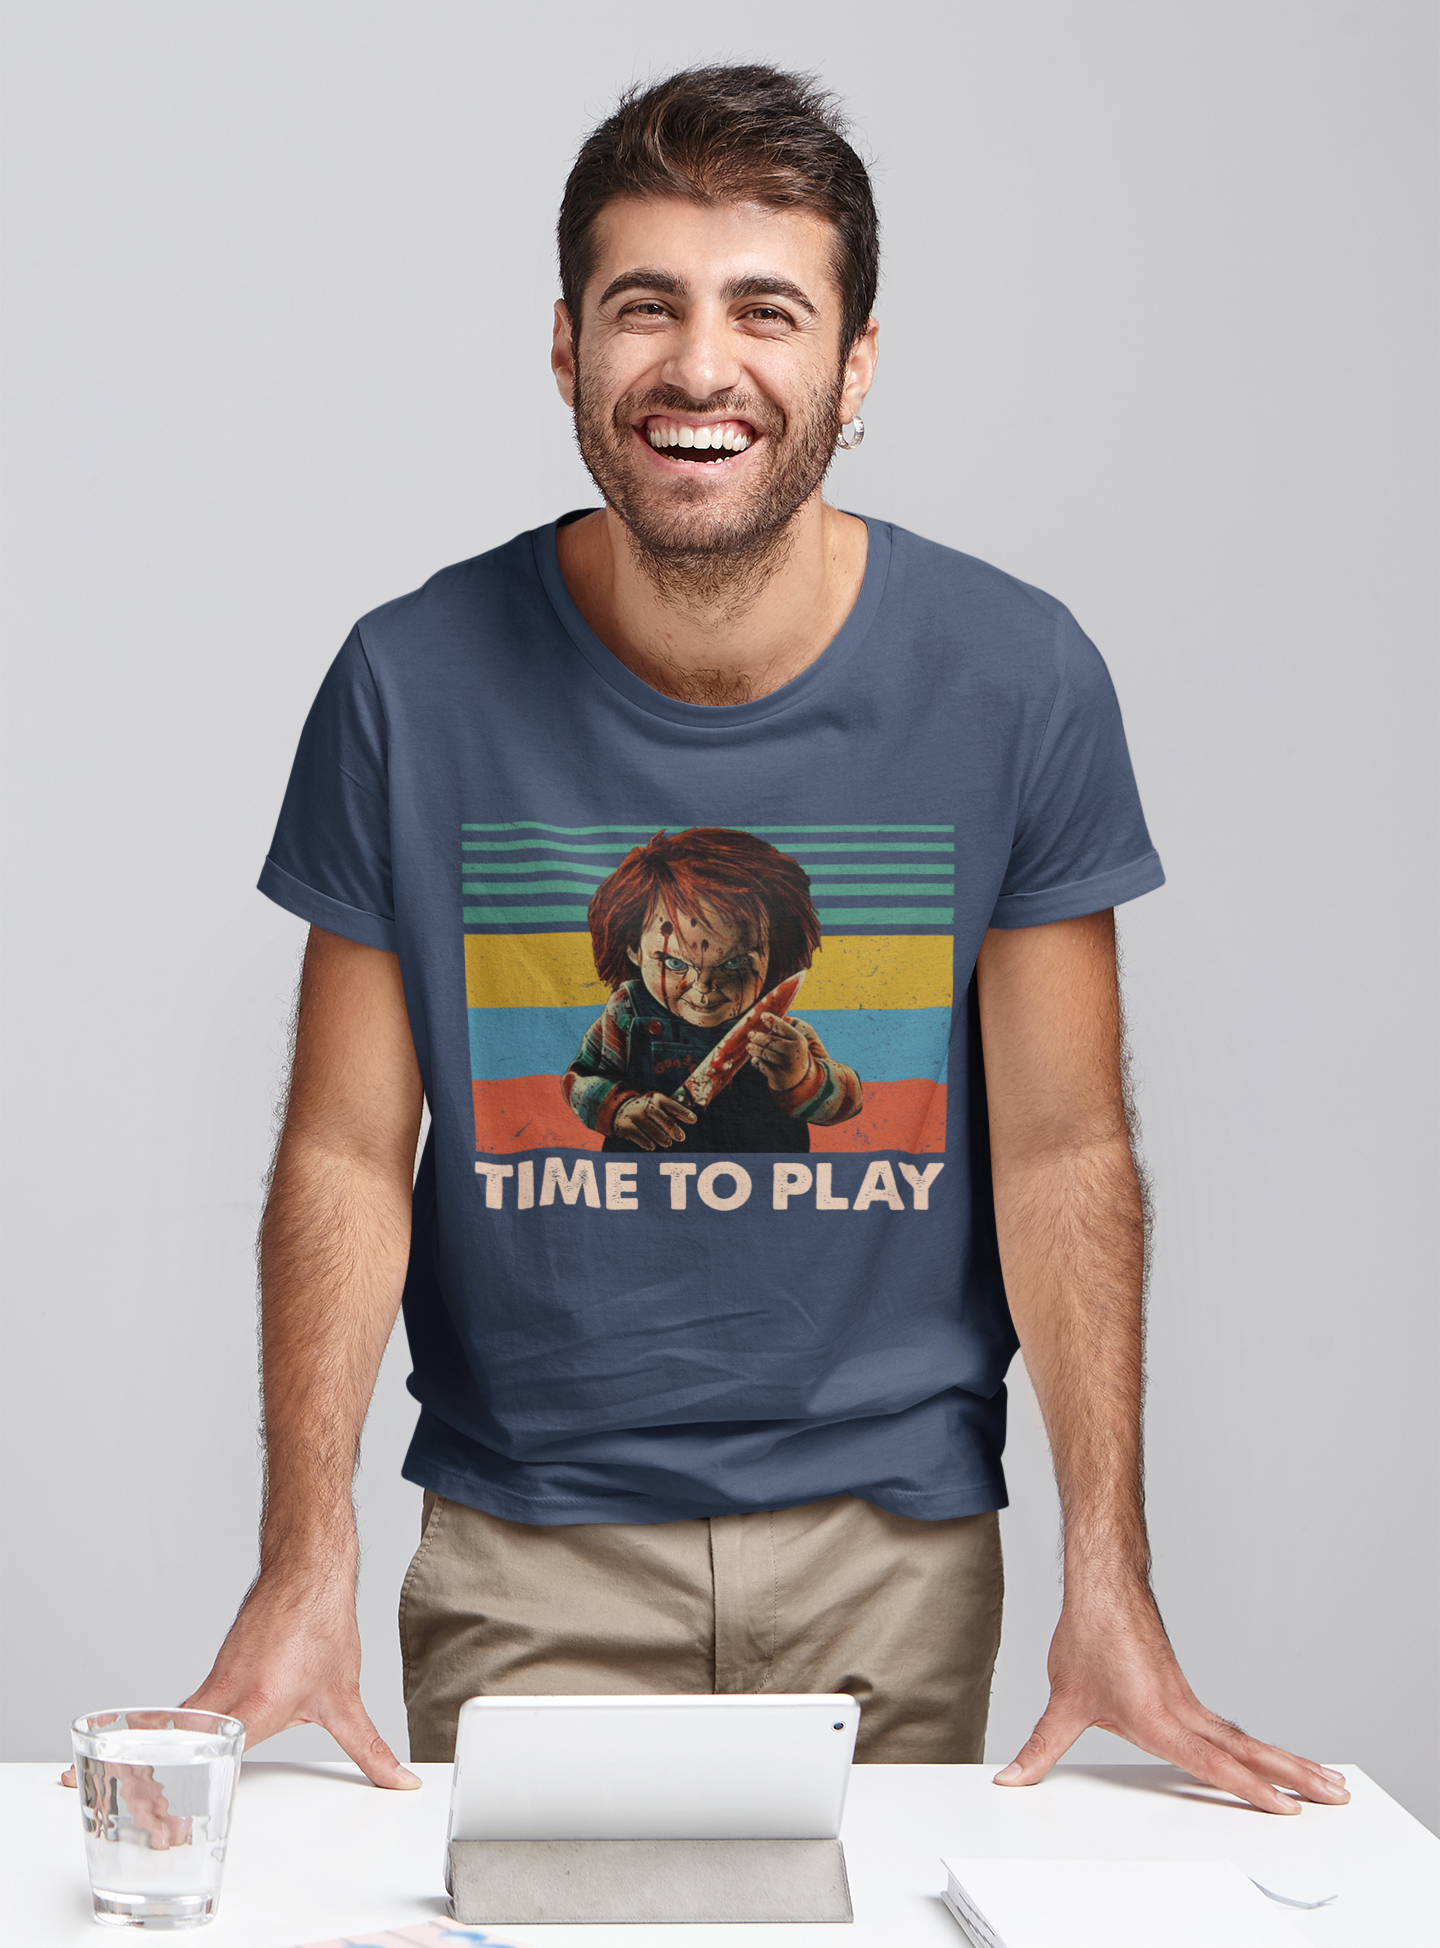 Chucky Vintage T Shirt, Time To Play T Shirt, Horror Character Shirt, Halloween Gifts